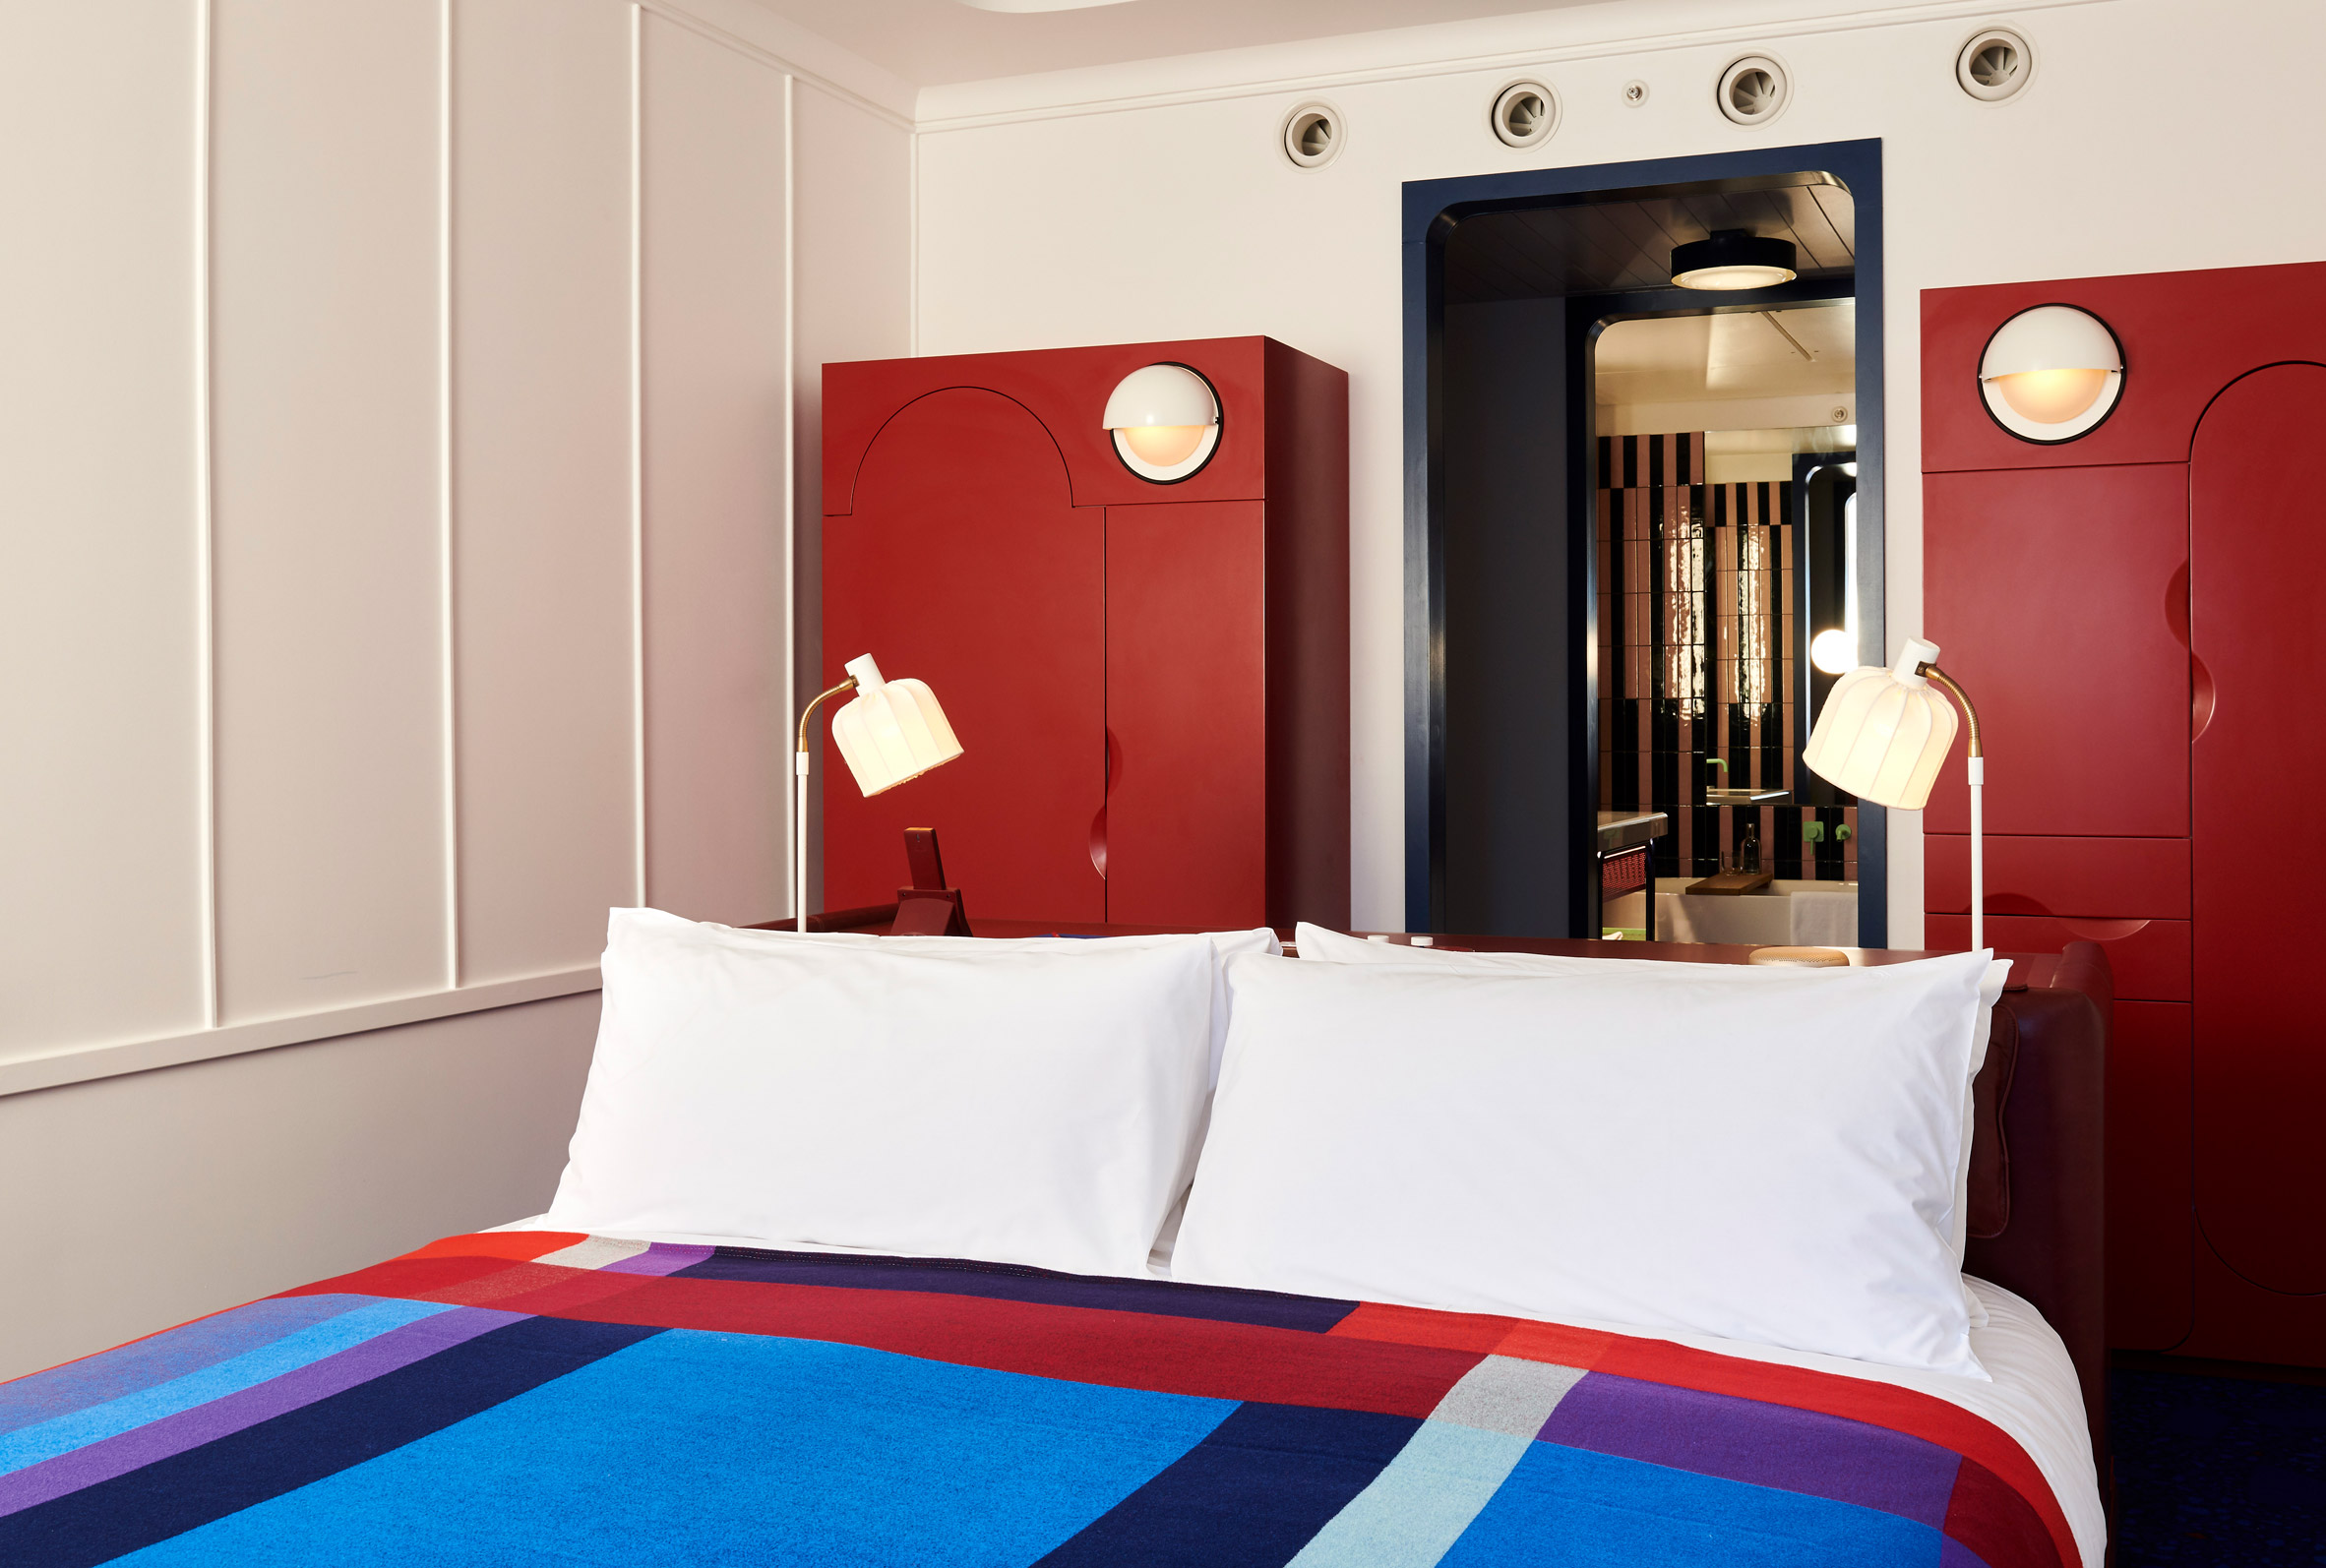 The Standard hotel in London by Shawn Hausman Design